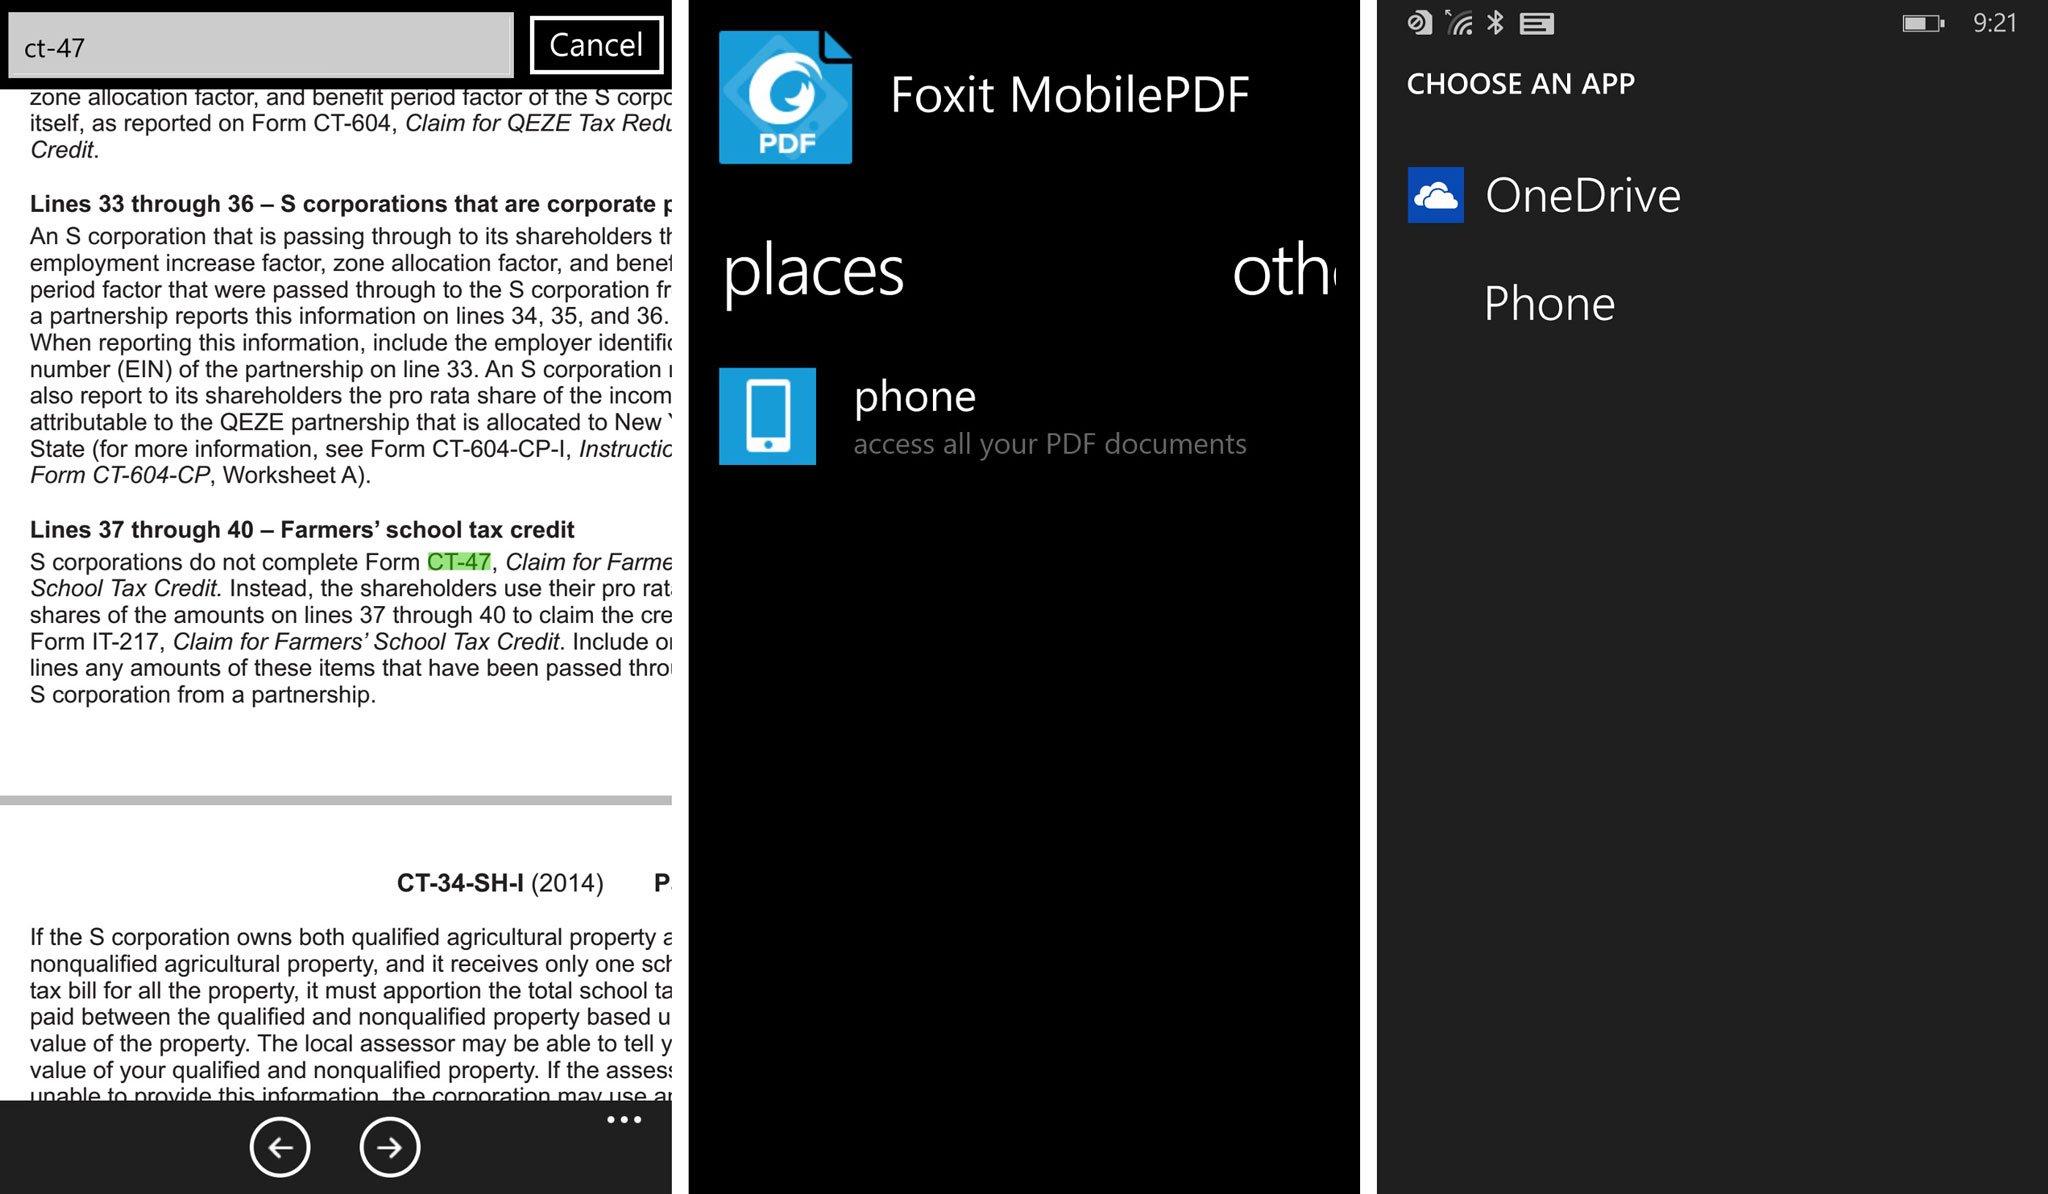 Foxit MobilePDF Reader comes to Windows and Windows Phone ...